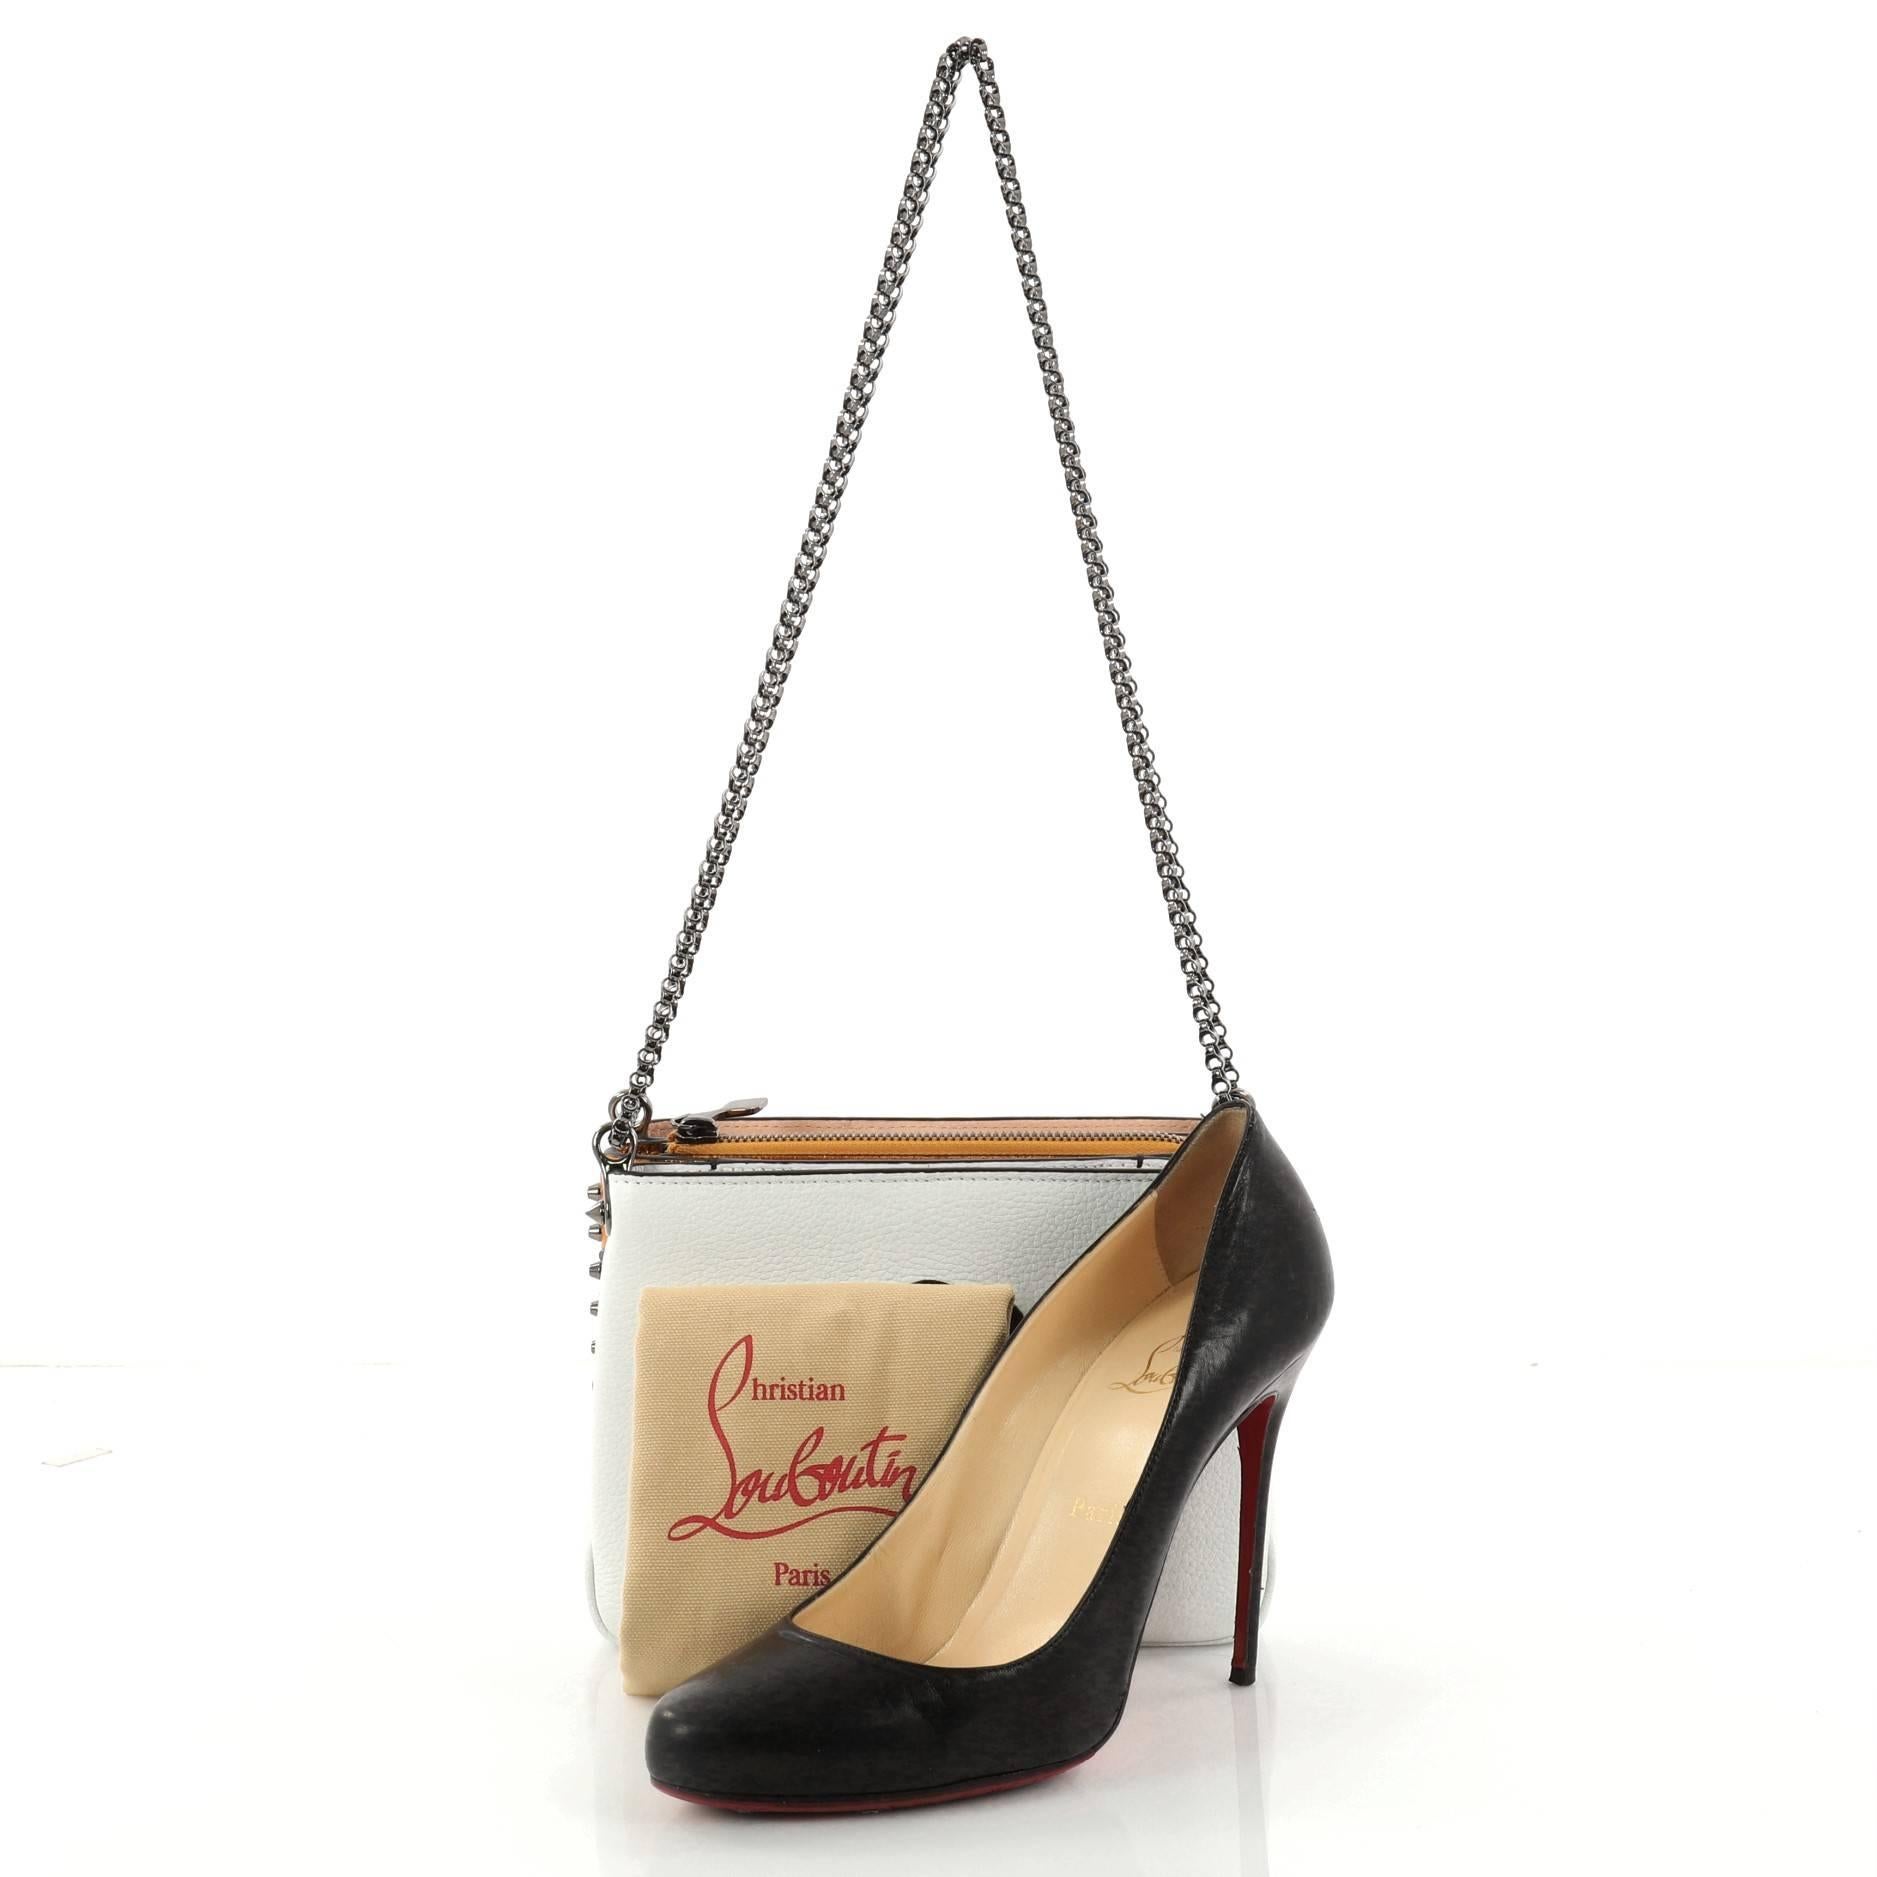 This authentic Christian Louboutin Triloubi Chain Bag Embellished Leather Small balances an edgy-chic design with feminine flair perfect for day to night looks. Crafted in white and pink embellished leather, this bag features Louboutin's signature